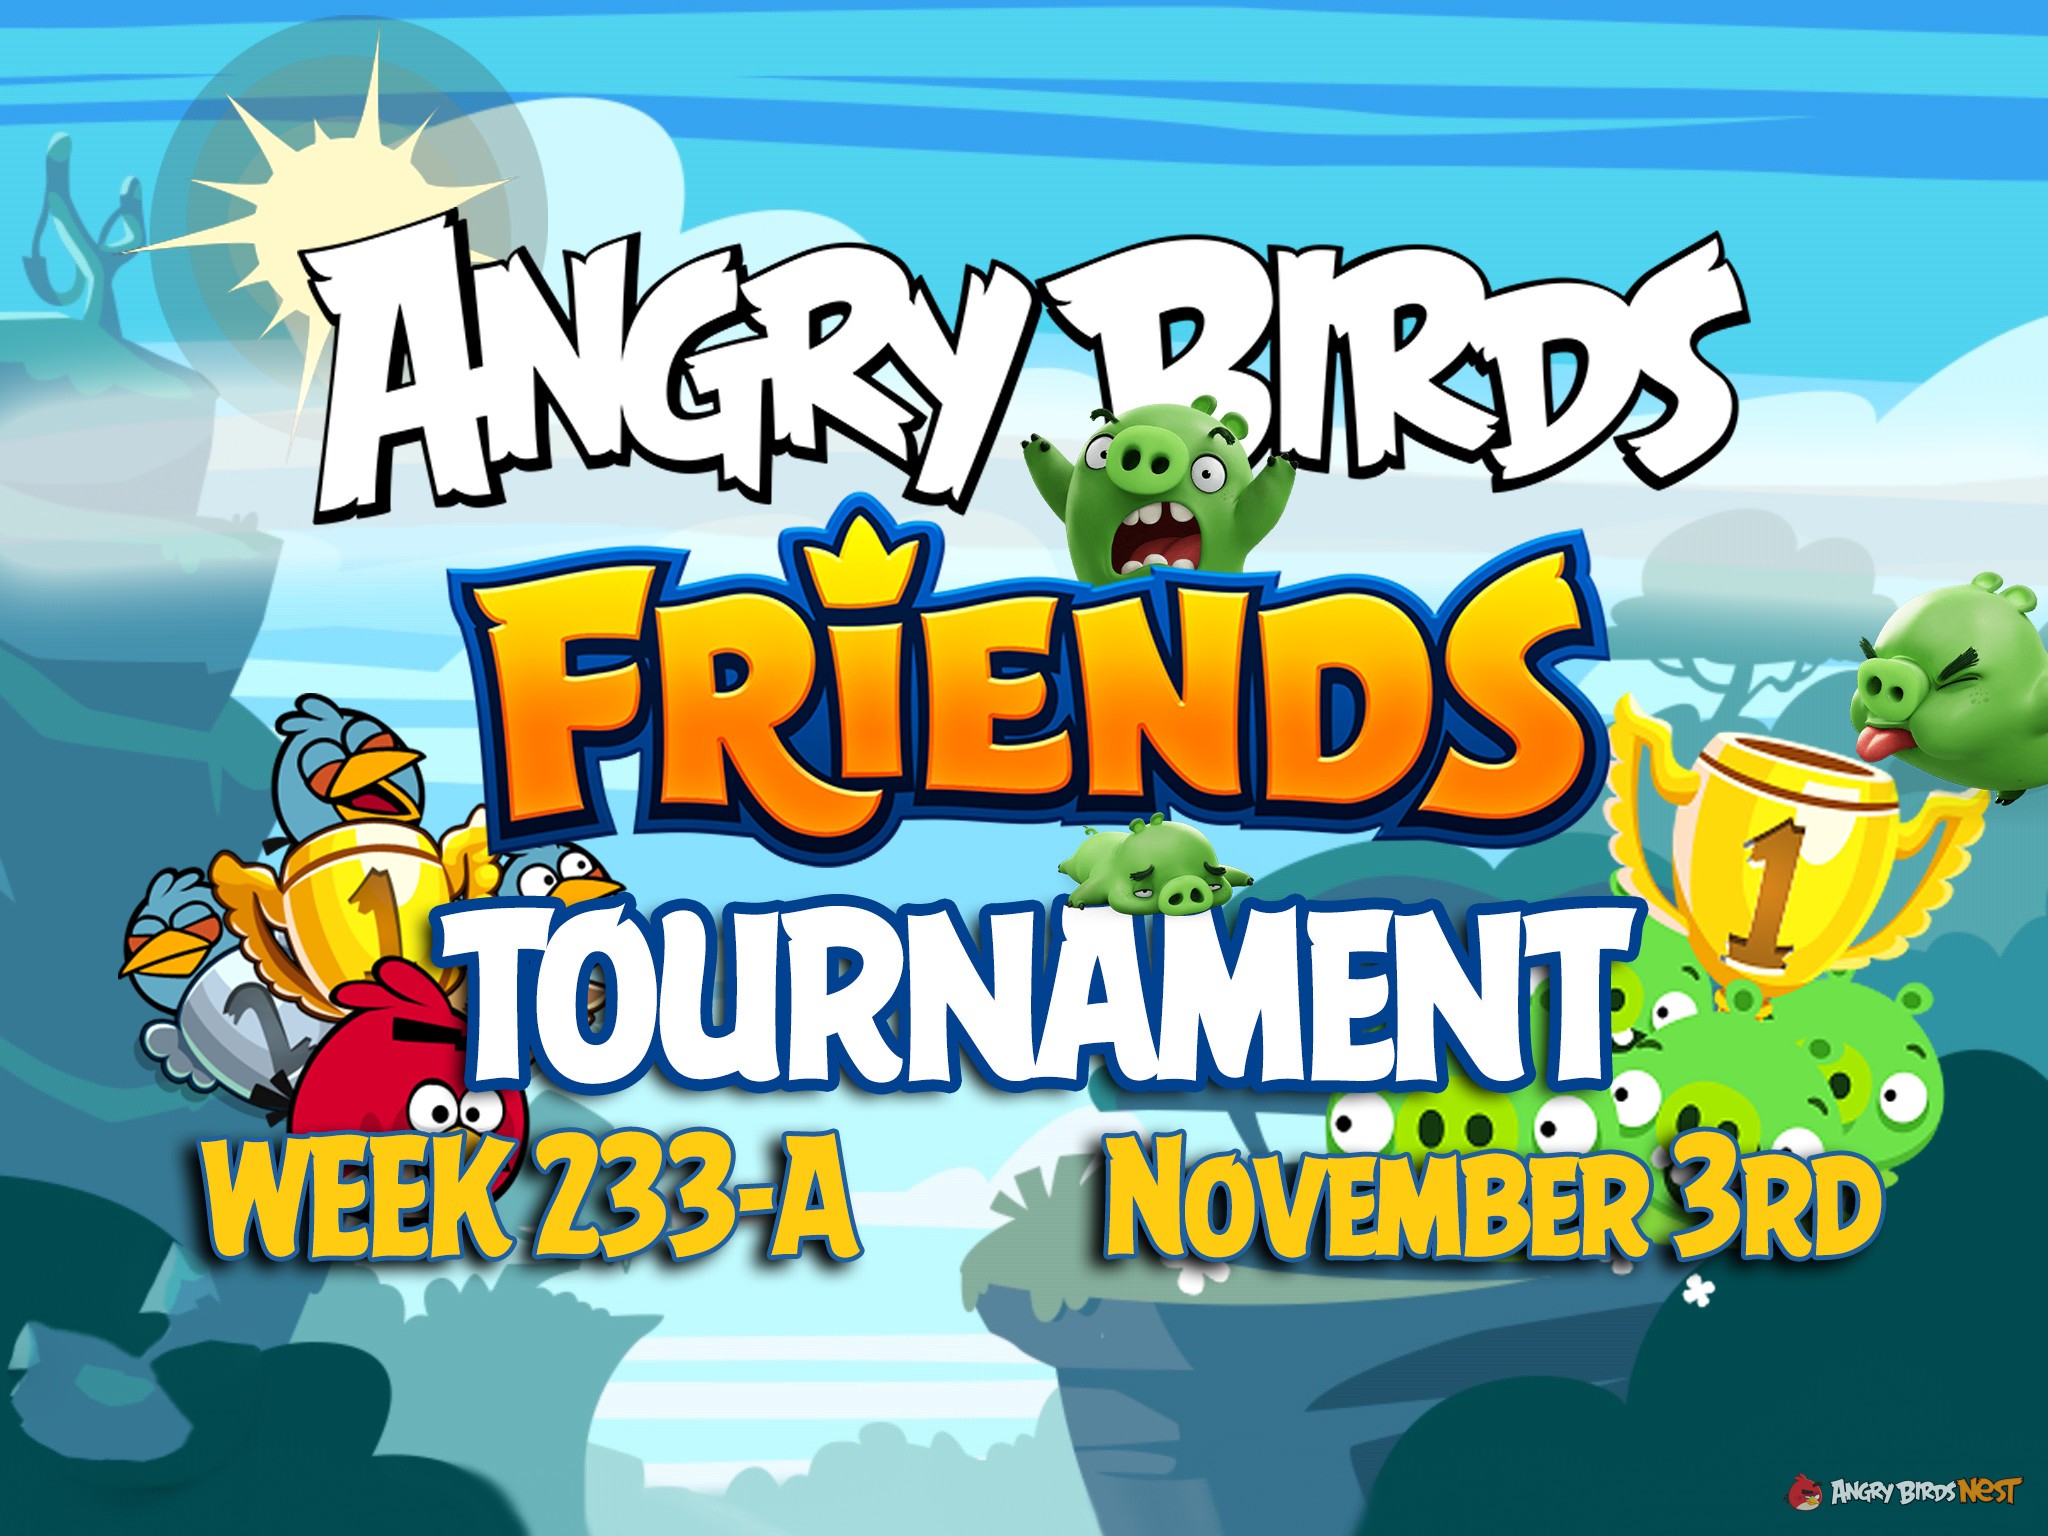 how do you report someone cheat on angry birds friends tournament